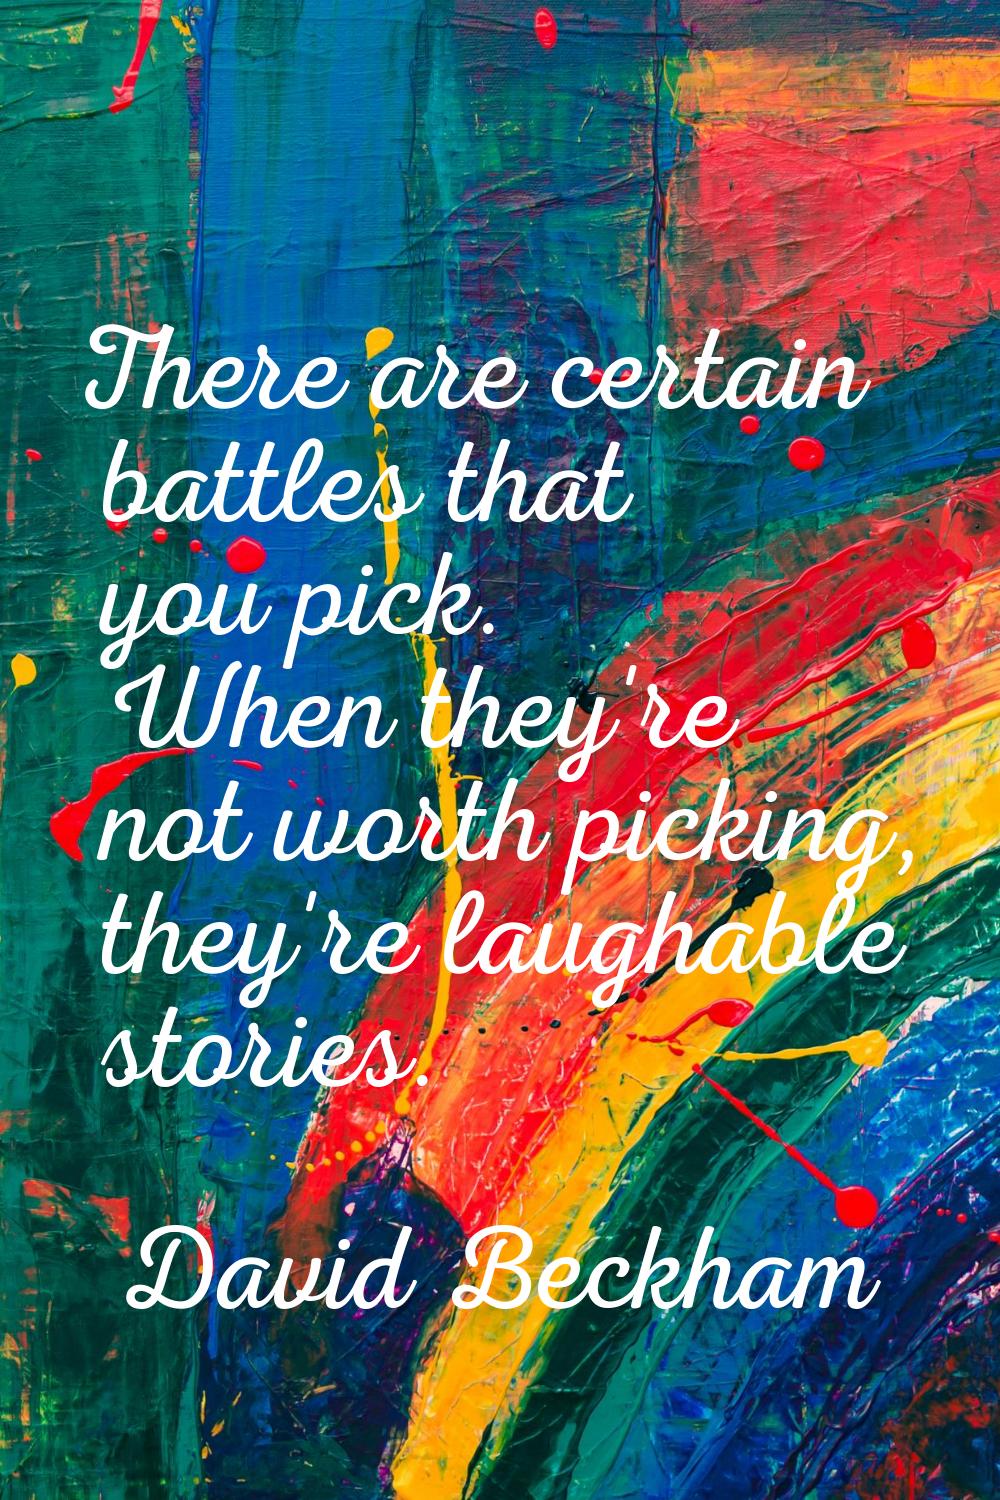 There are certain battles that you pick. When they're not worth picking, they're laughable stories.